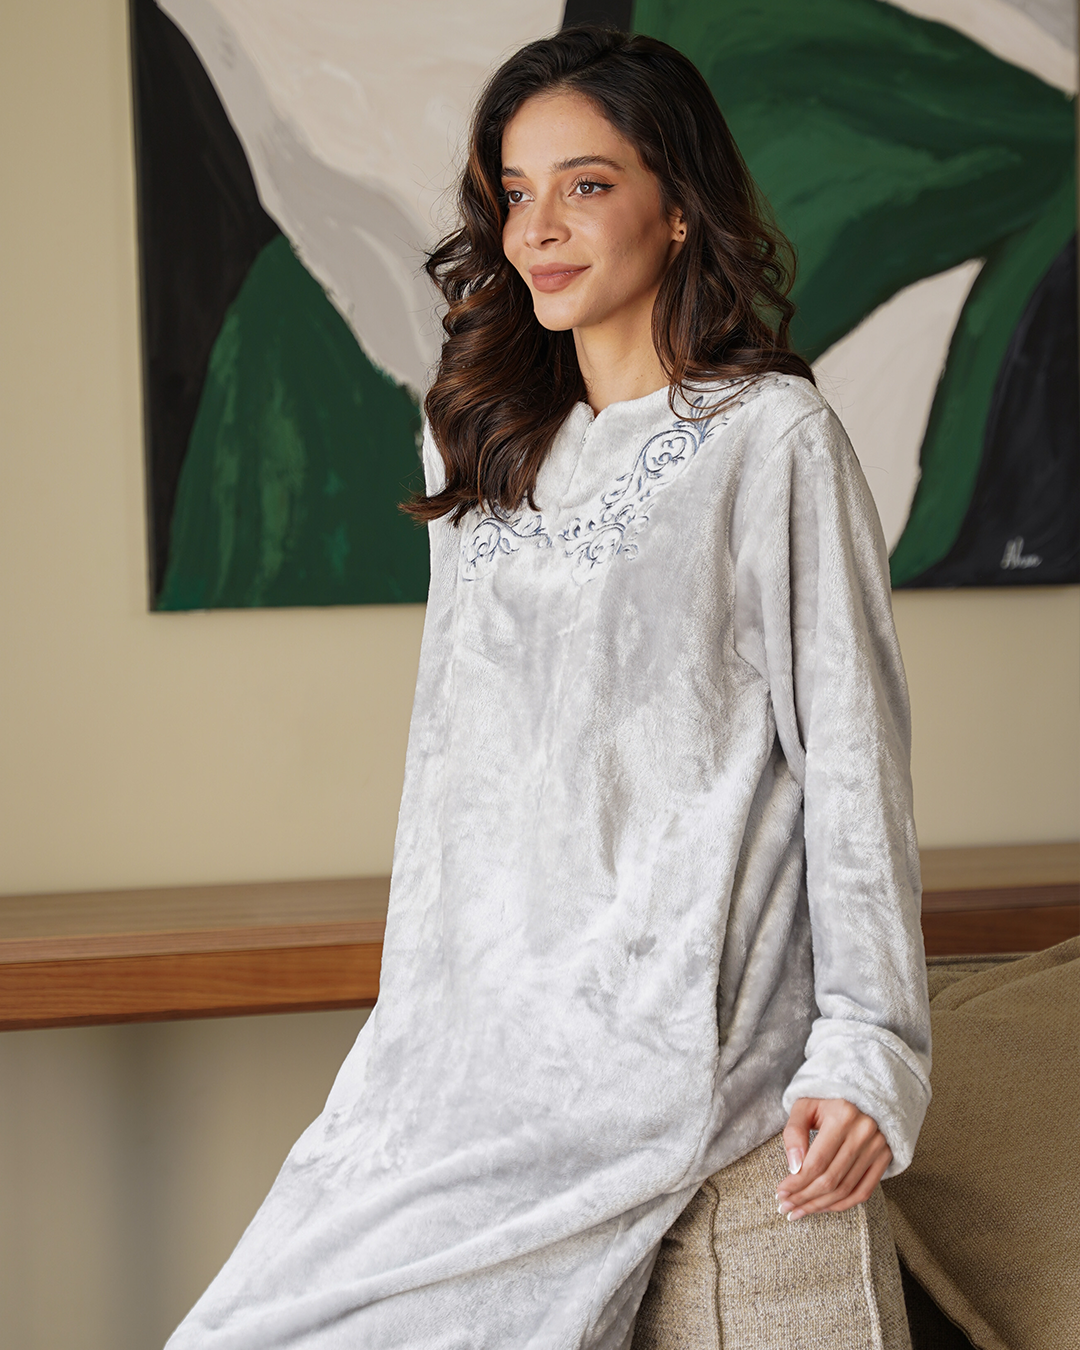 Women's nightshirt with chest zipper and rose embroidery, Polar